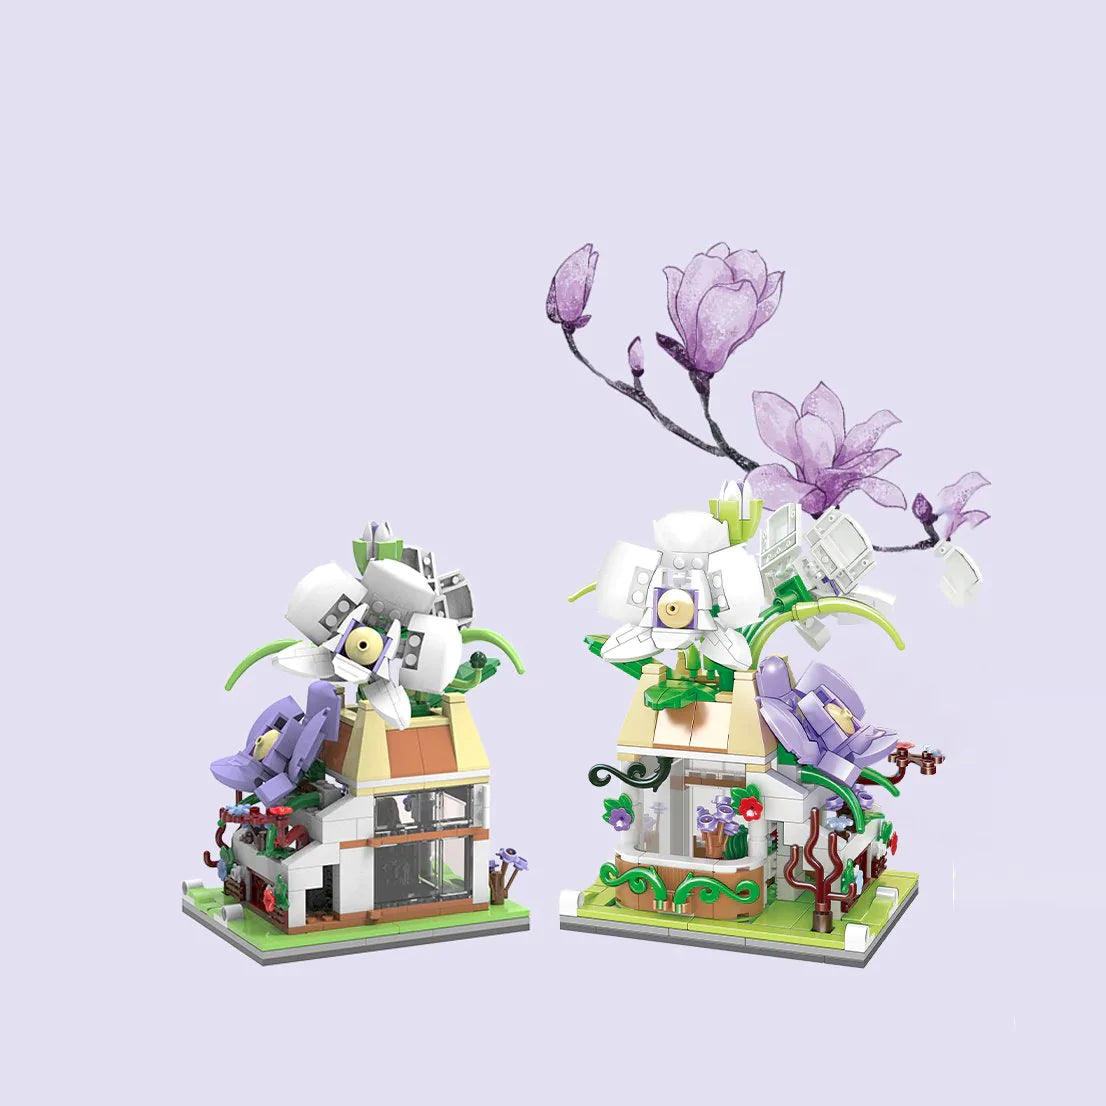 Micro Sakura Cherry Blossom and Orchid Stores